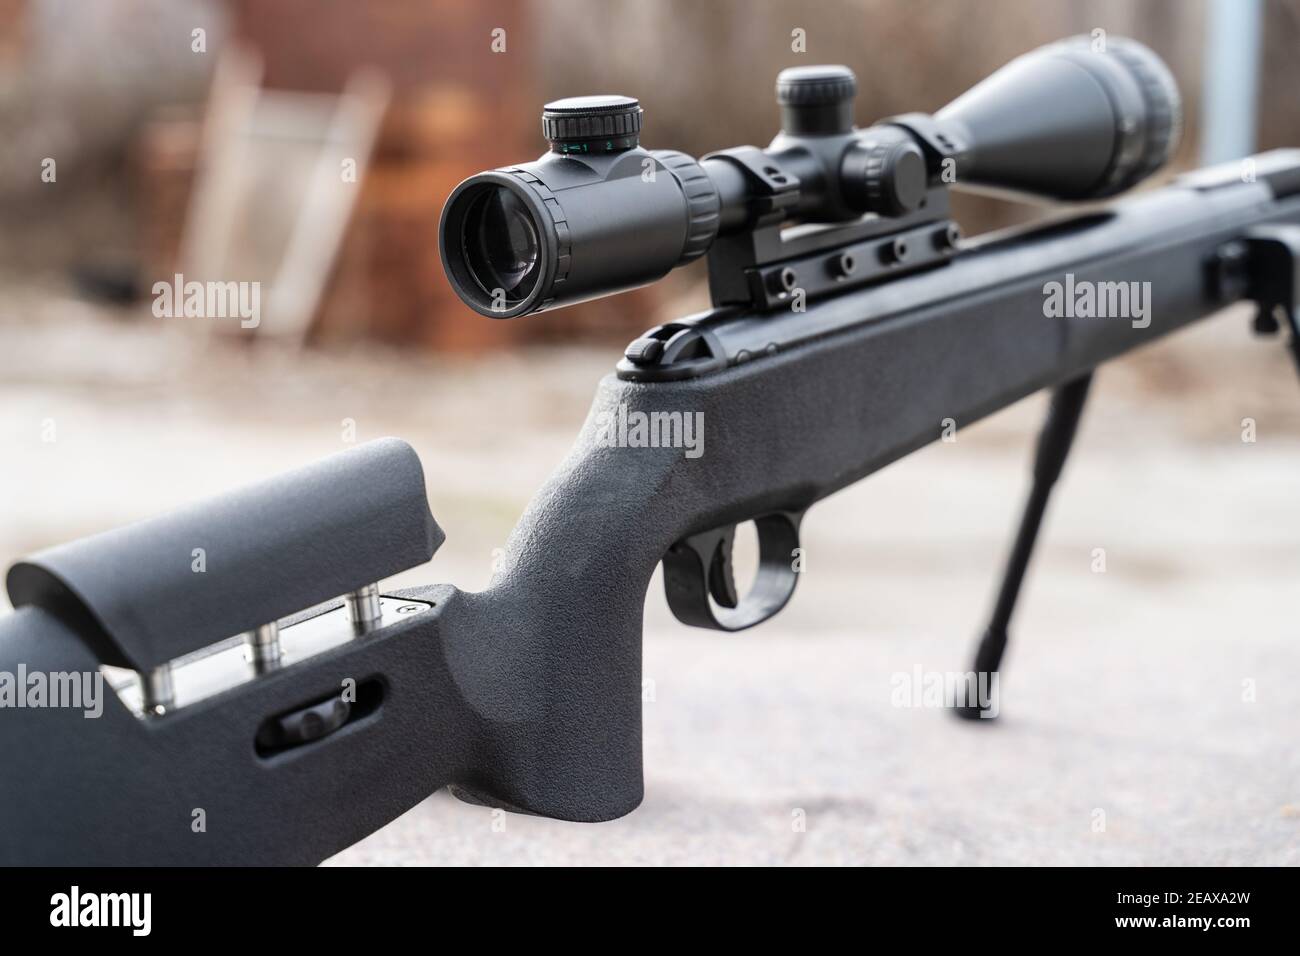 Black polymer frame modern Air gun with optics on the table outdoor Stock Photo